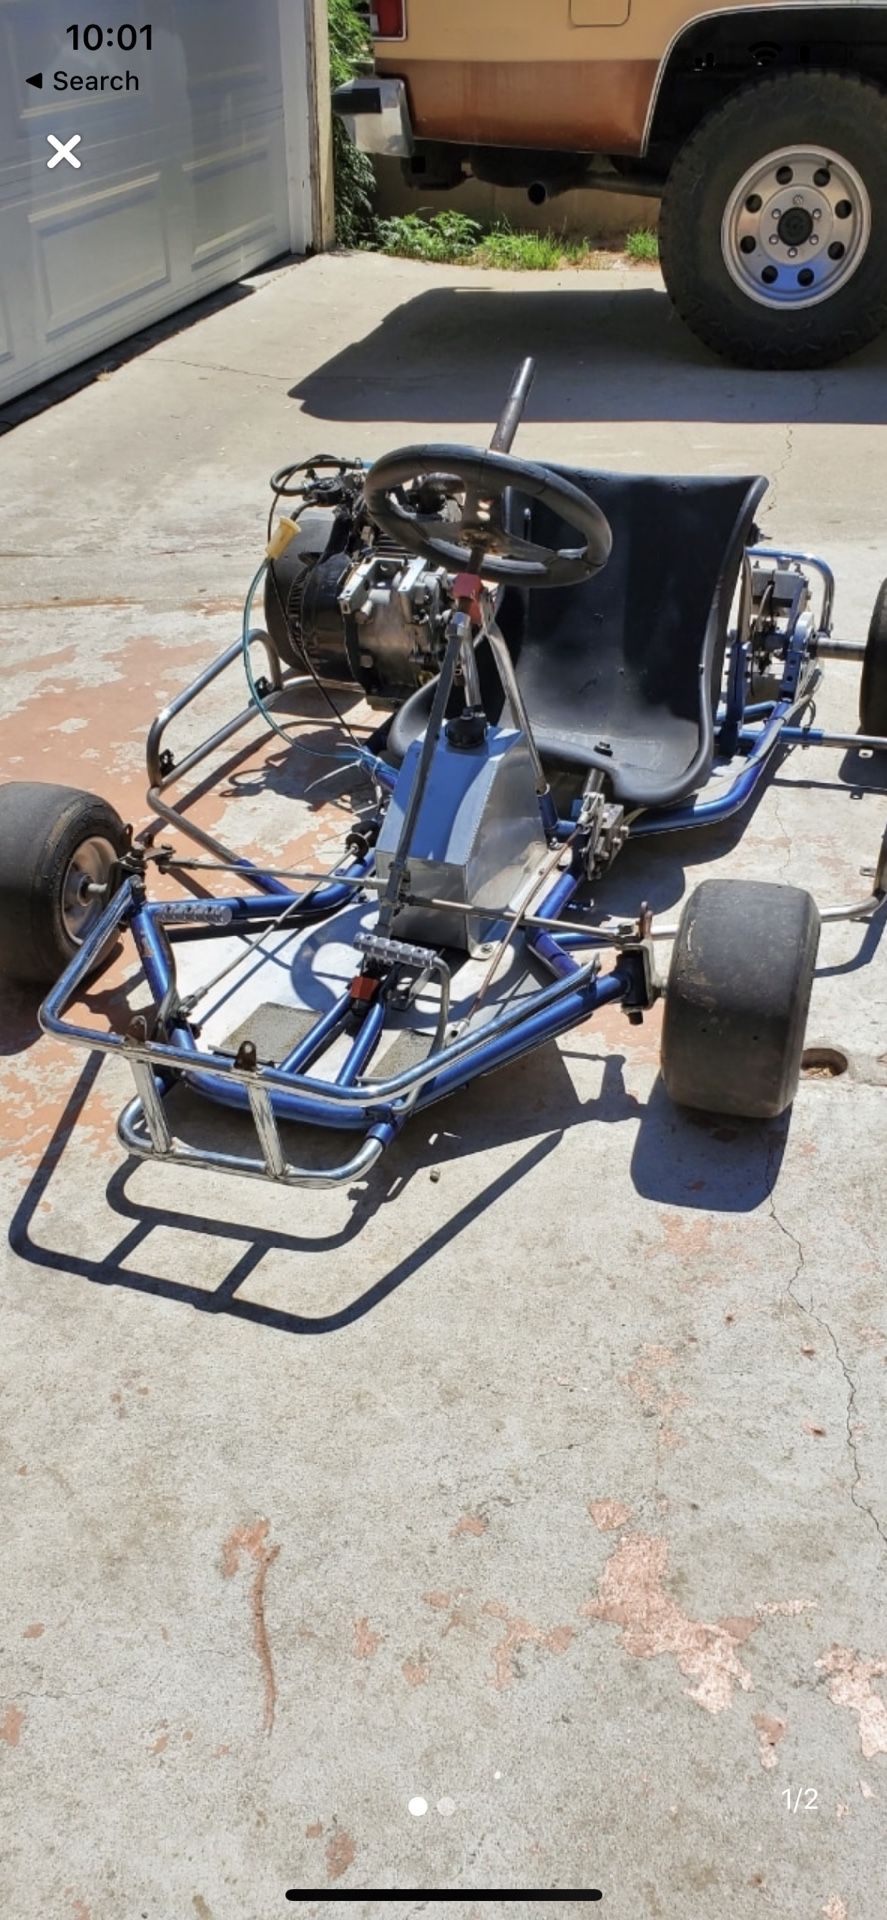 Shifter kart frame with brand new 212cc/brand new clutch.